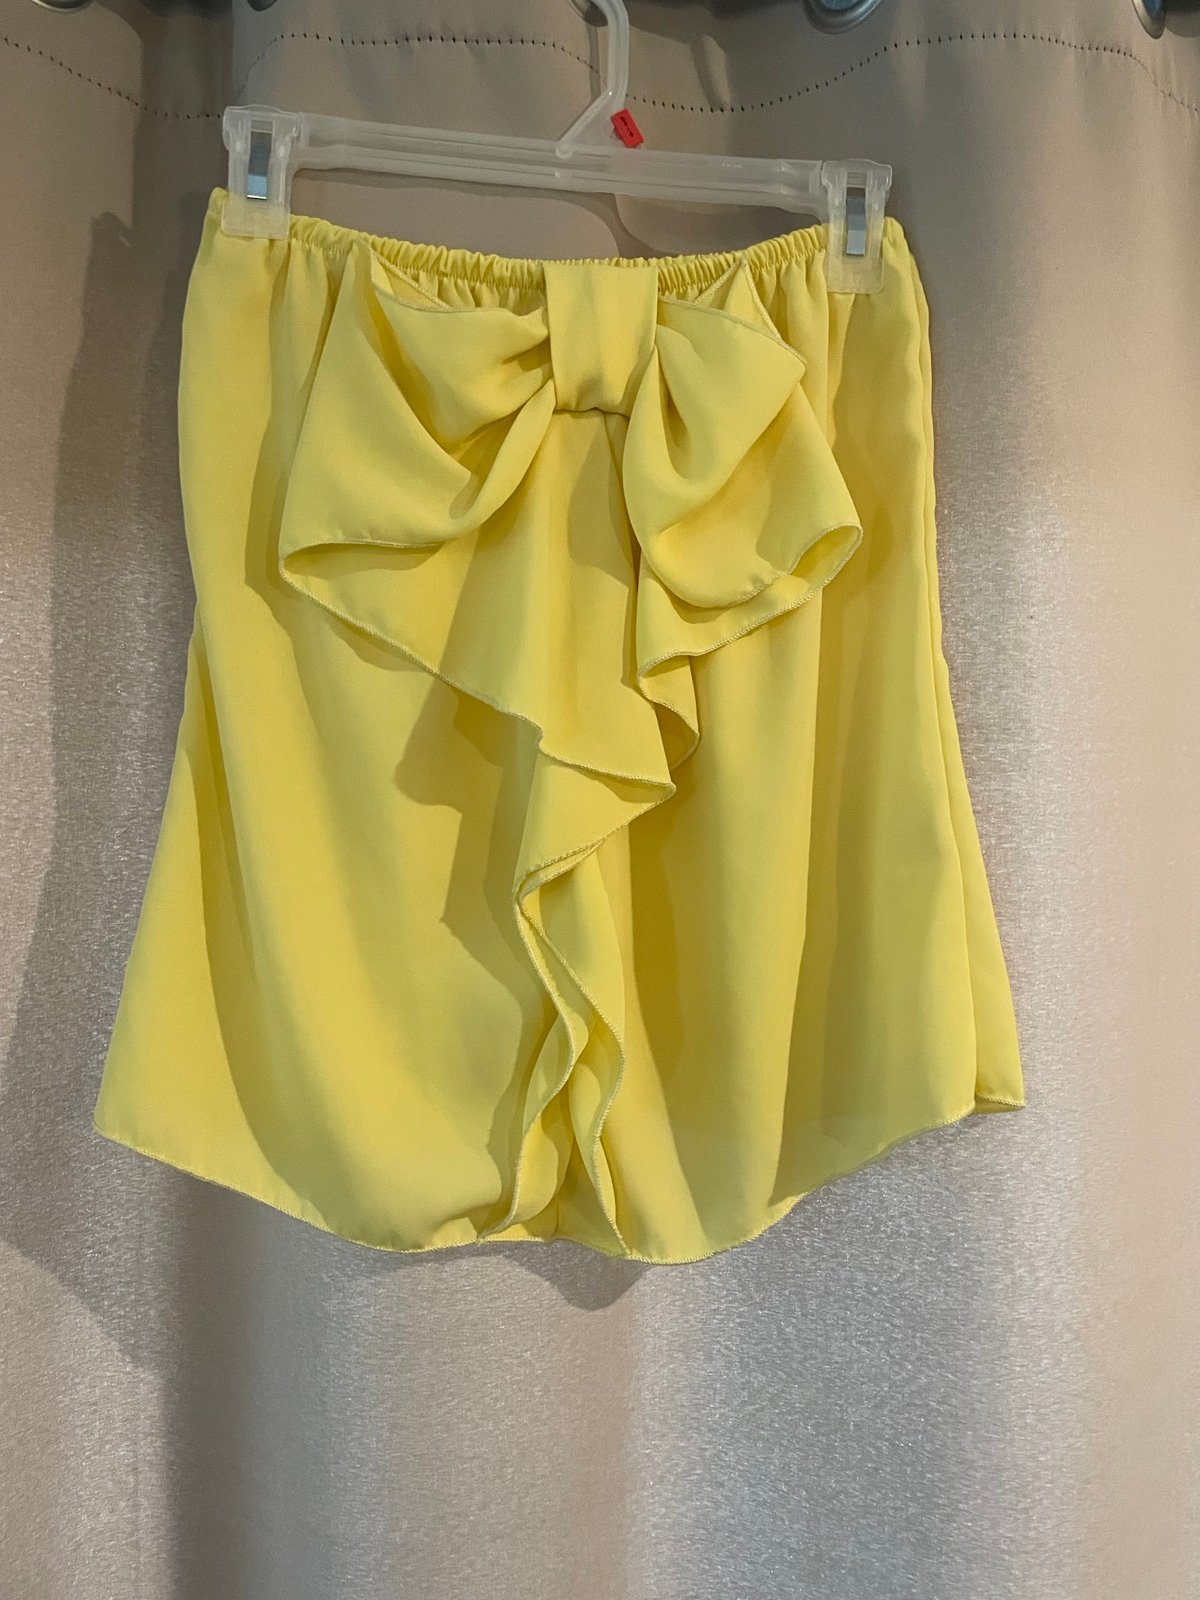 Affordable Women’s Yellow Strapless Blouse PlSunu4x8 online store